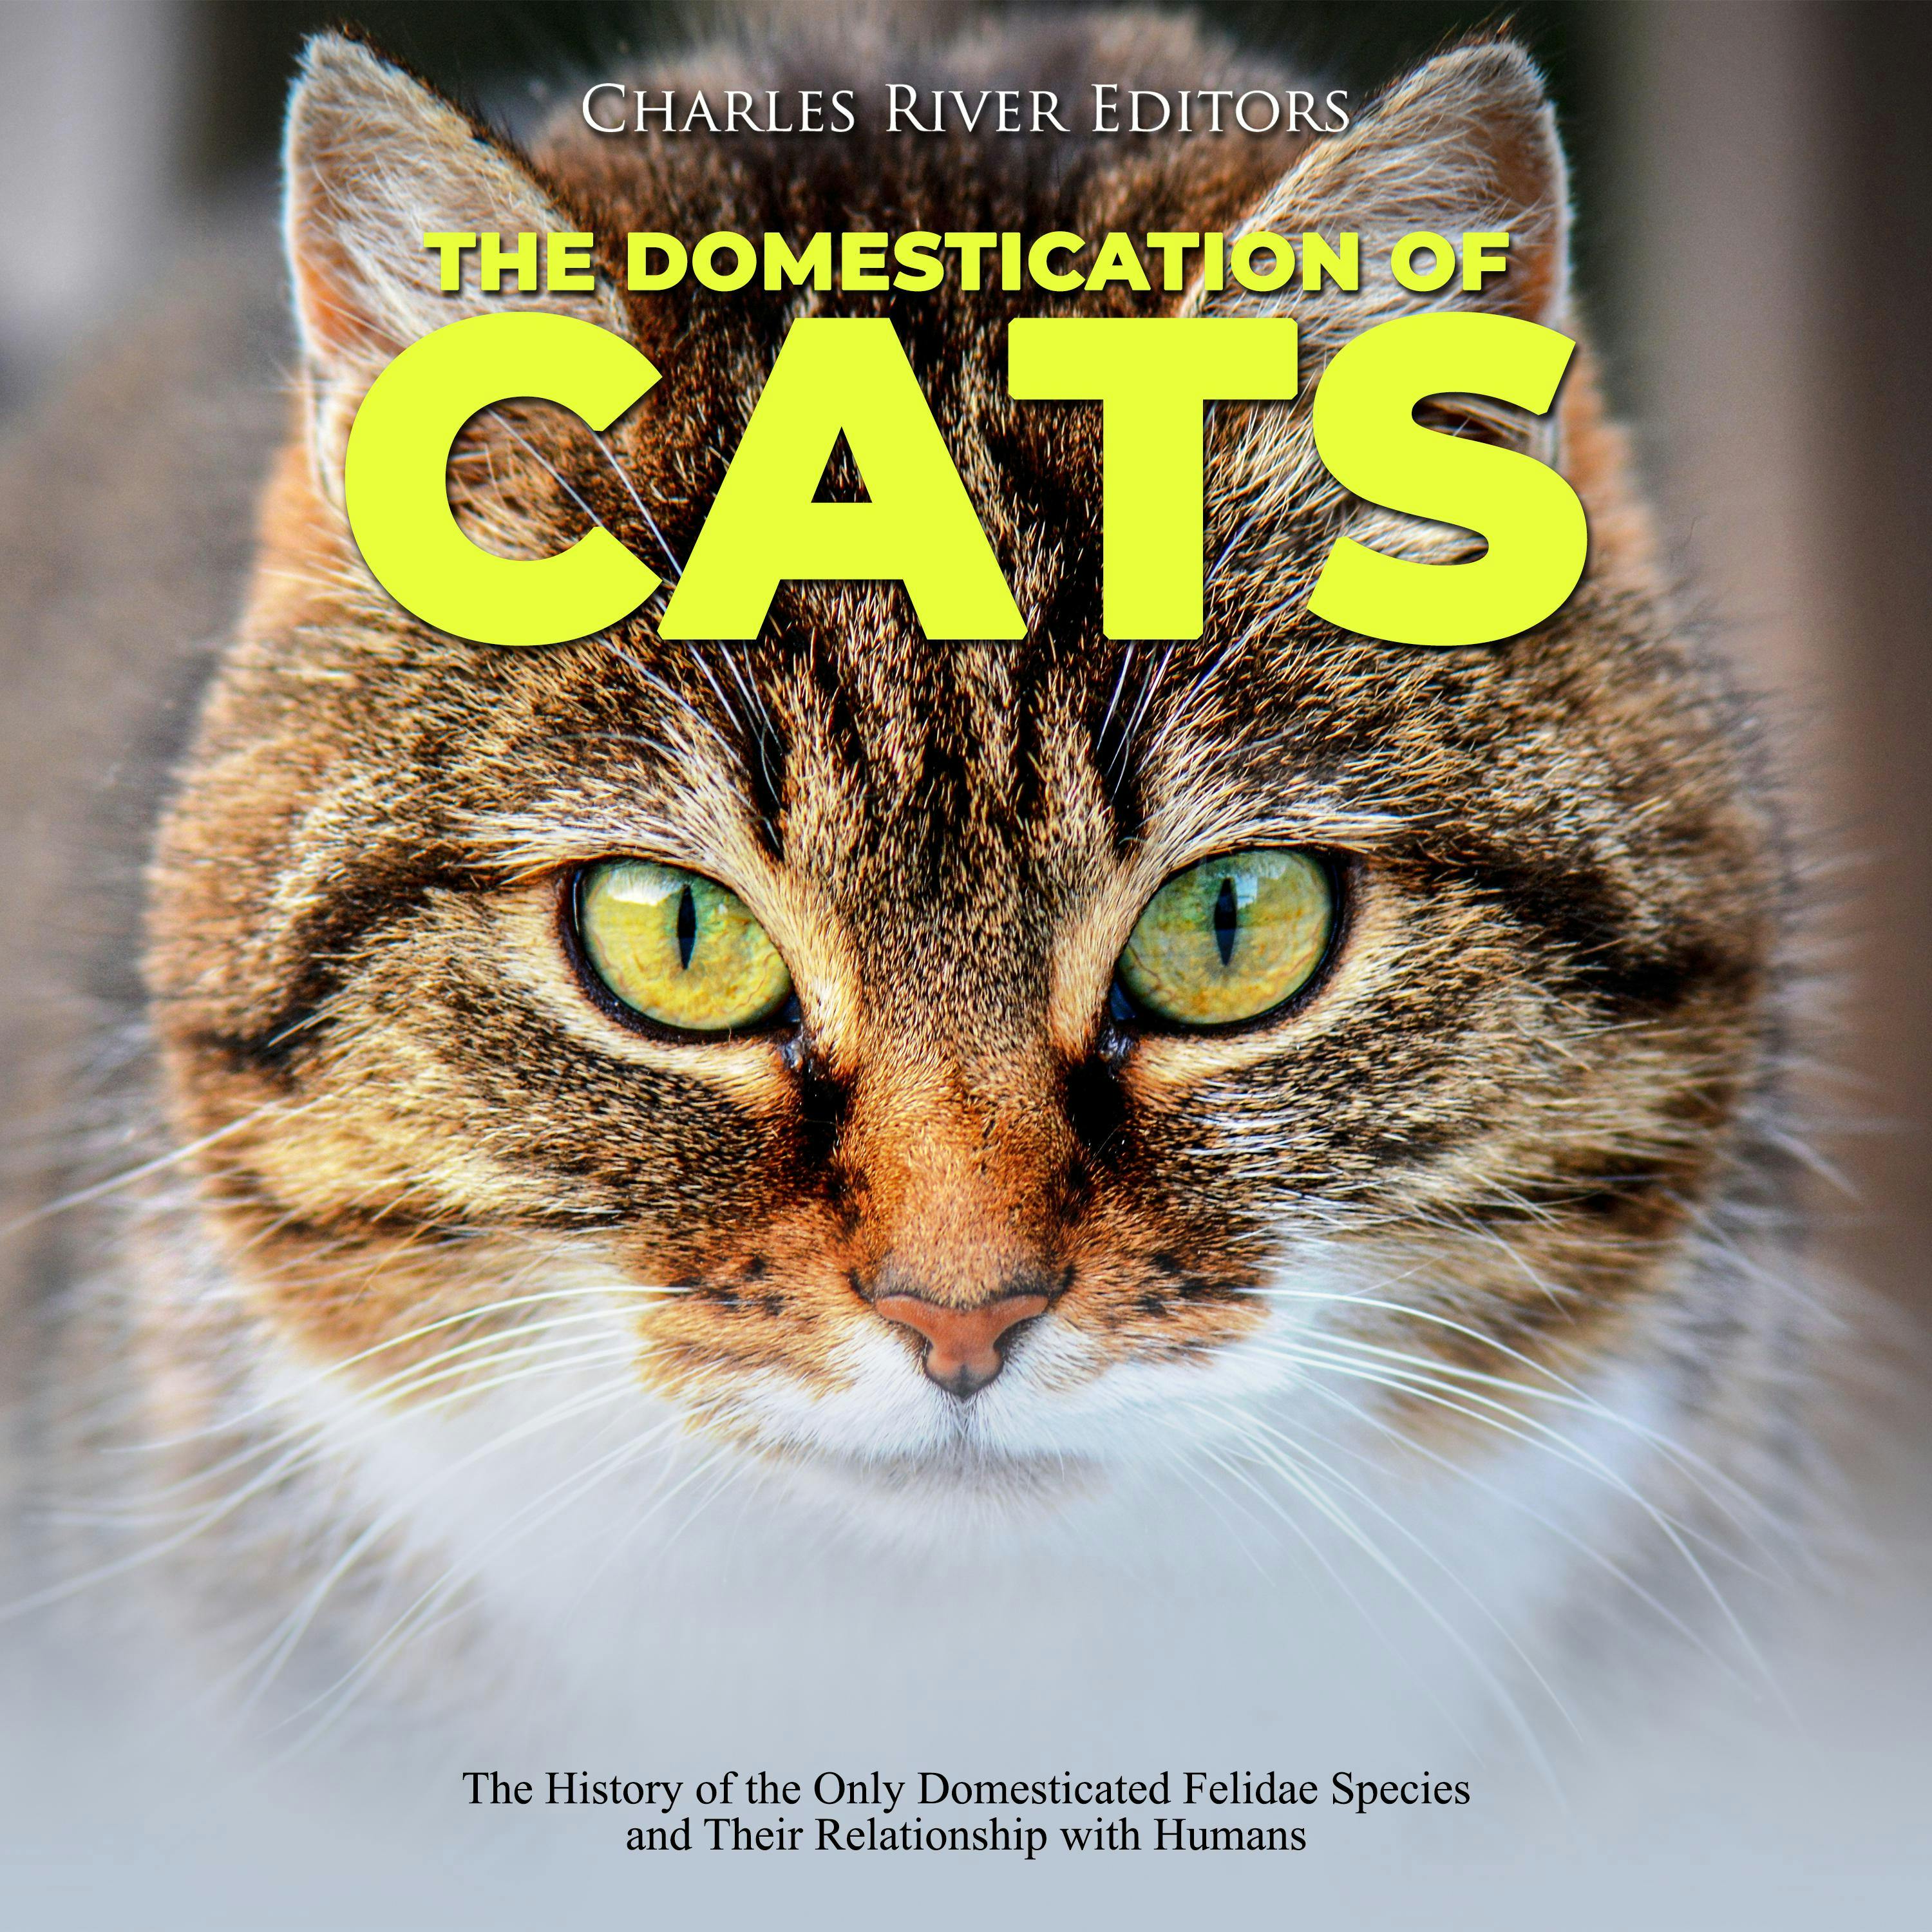 The Domestication of Cats: The History of the Only Domesticated Felidae Species and Their Relationship with Humans - Charles River Editors